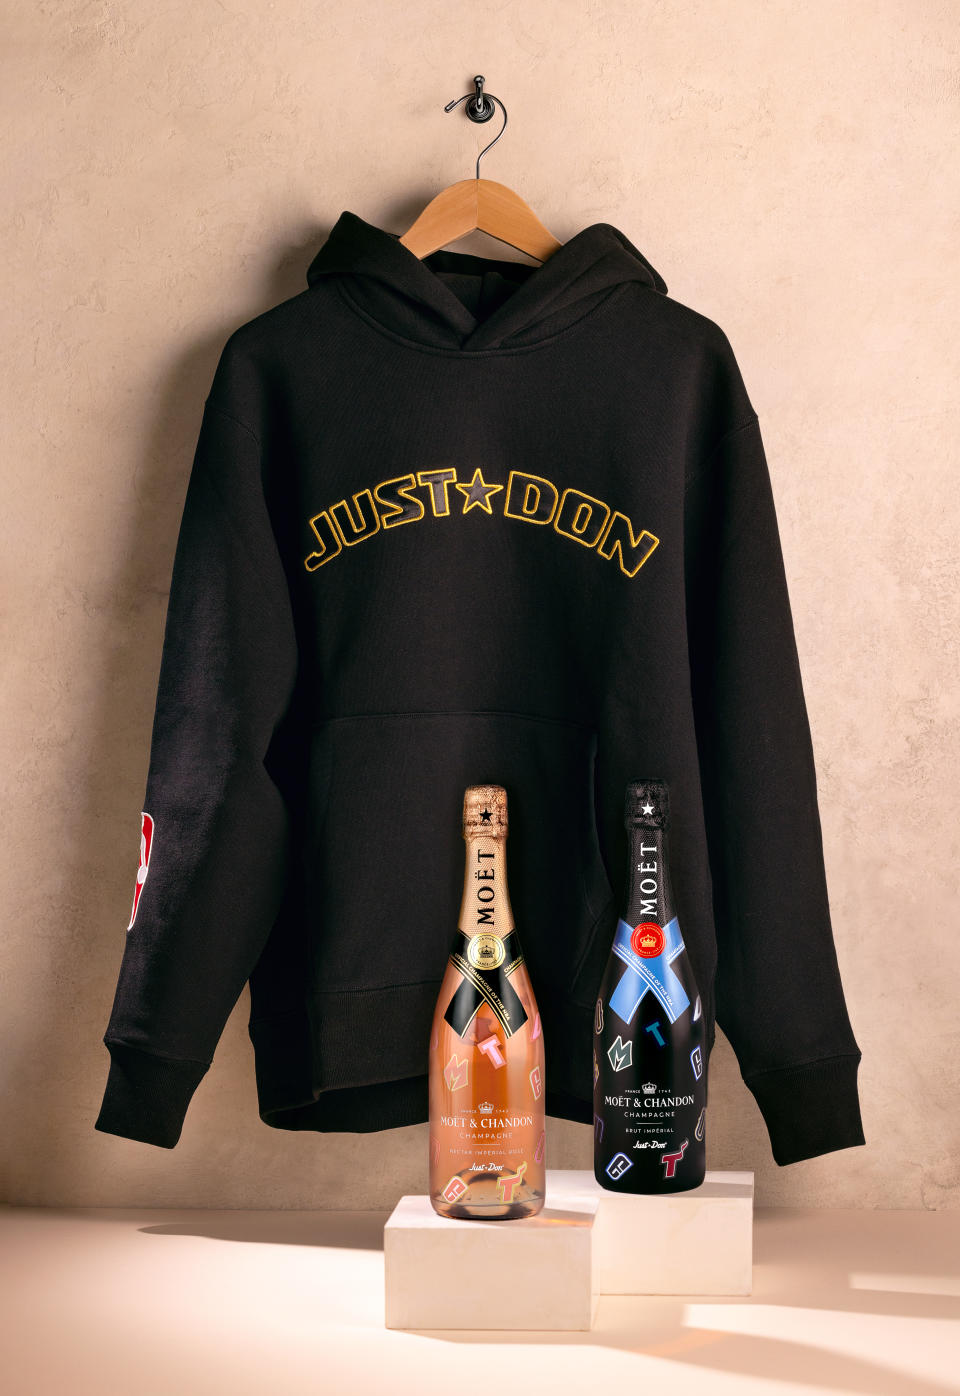 Moët & Chandon and NBA collection by Just Don.